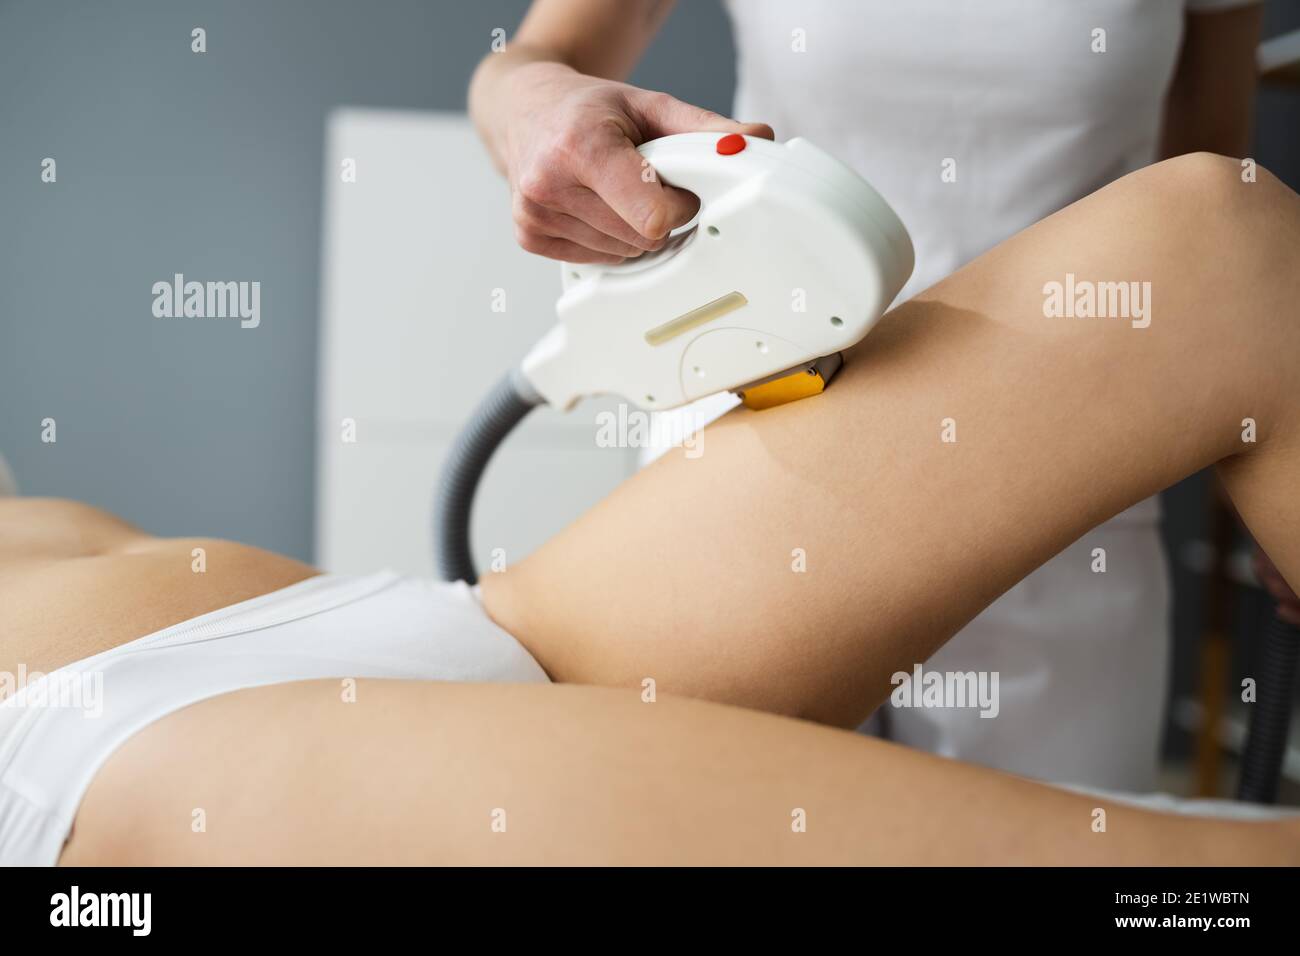 Laser Hair Removal And IPL Depilation Treatment Stock Photo